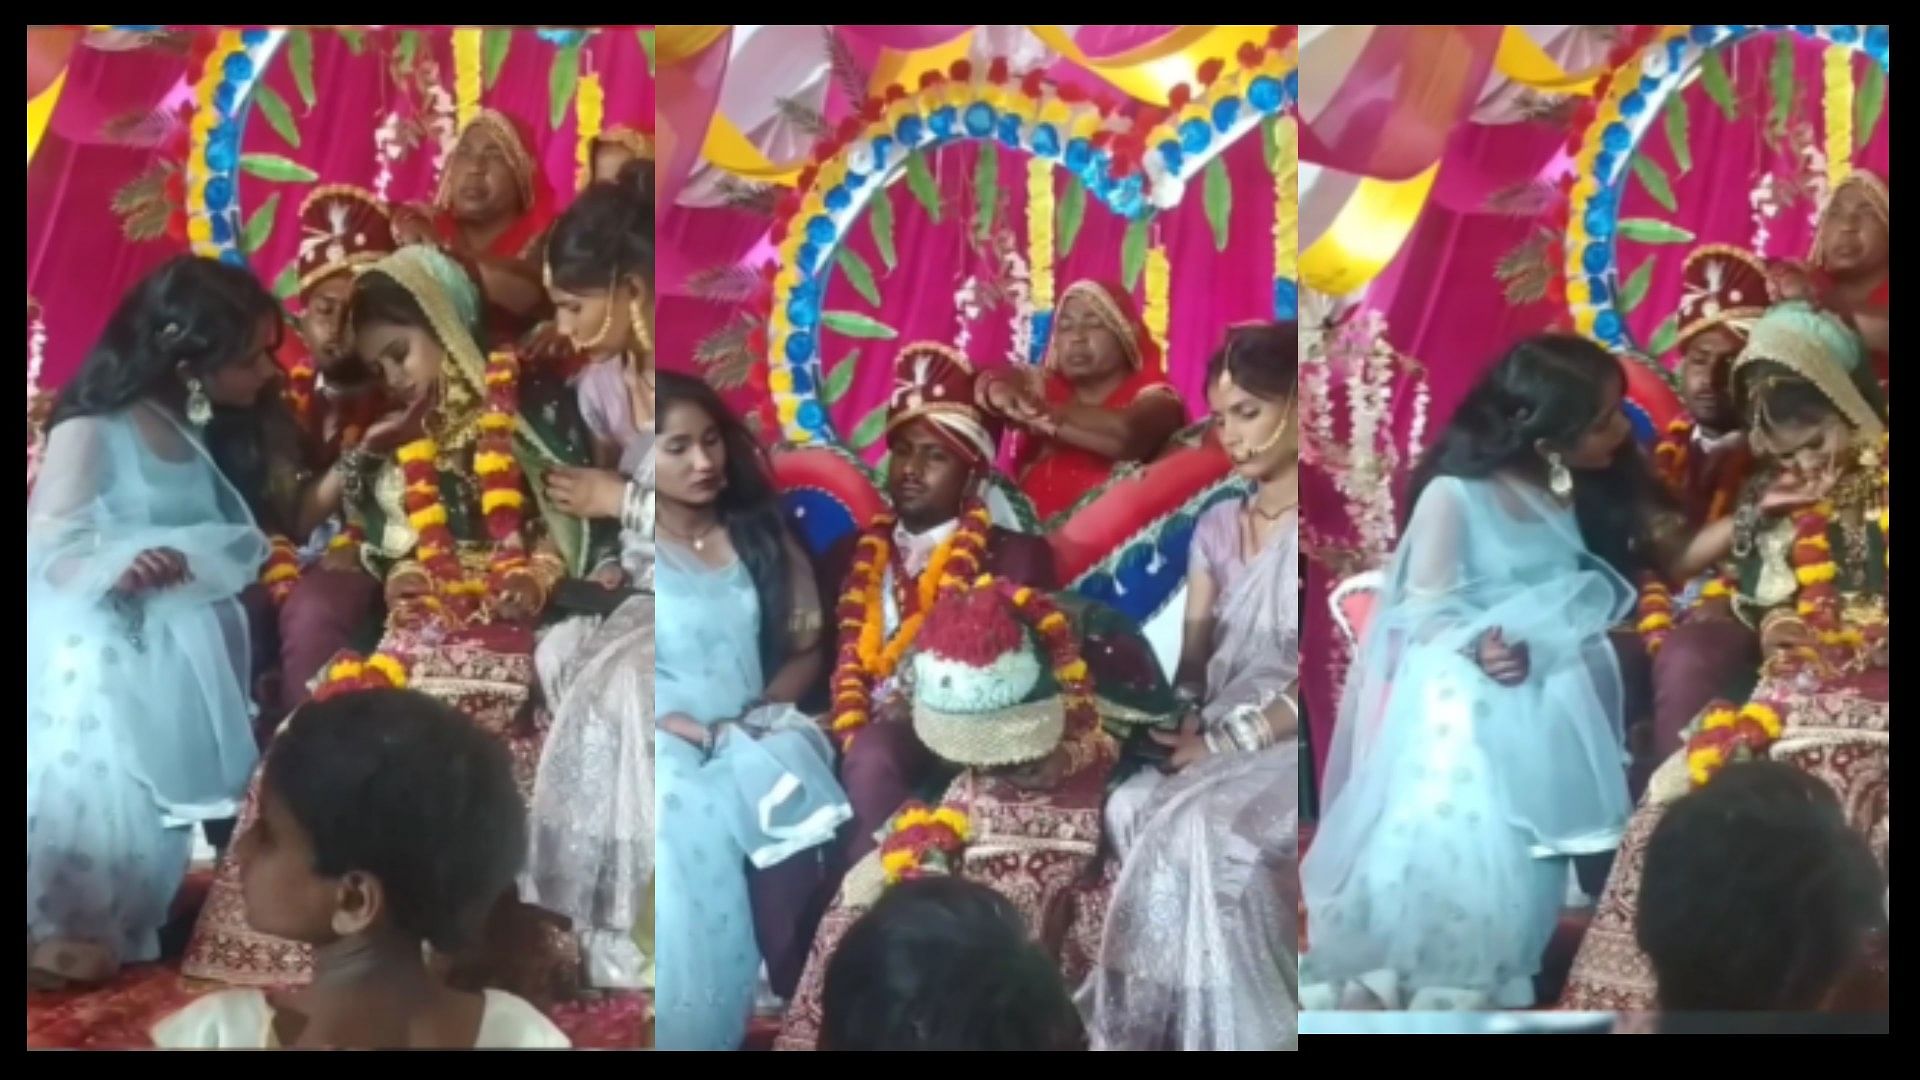 The bride started crying after seeing groom on the stage video goes viral